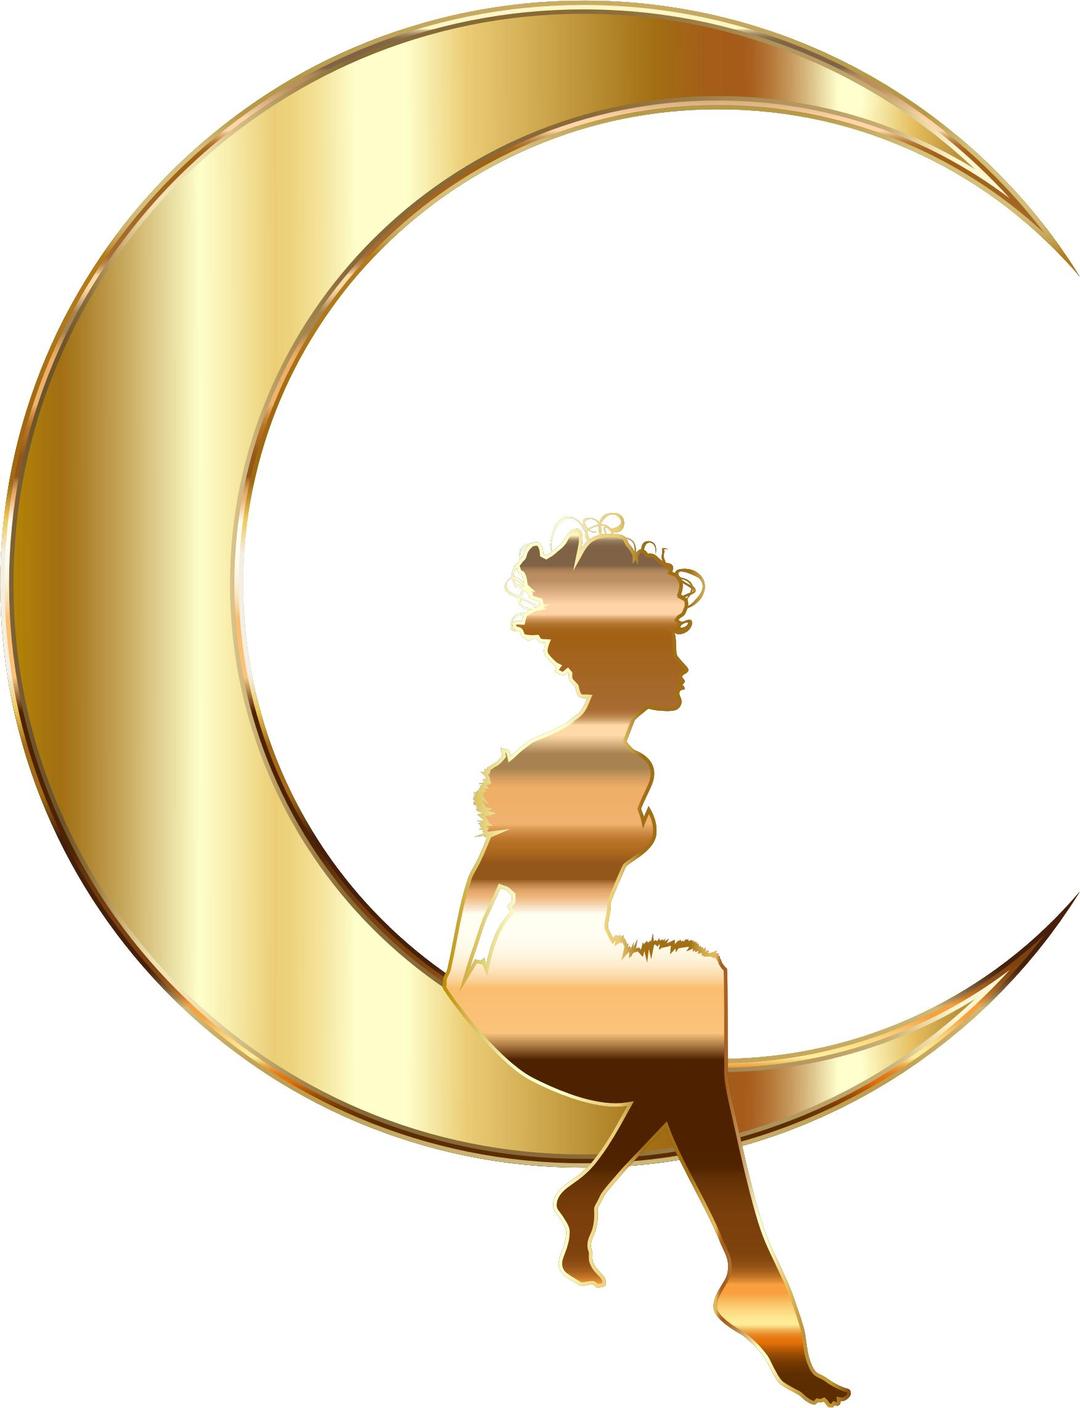 Gold Fairy Sitting On Crescent Moon No Background png transparent